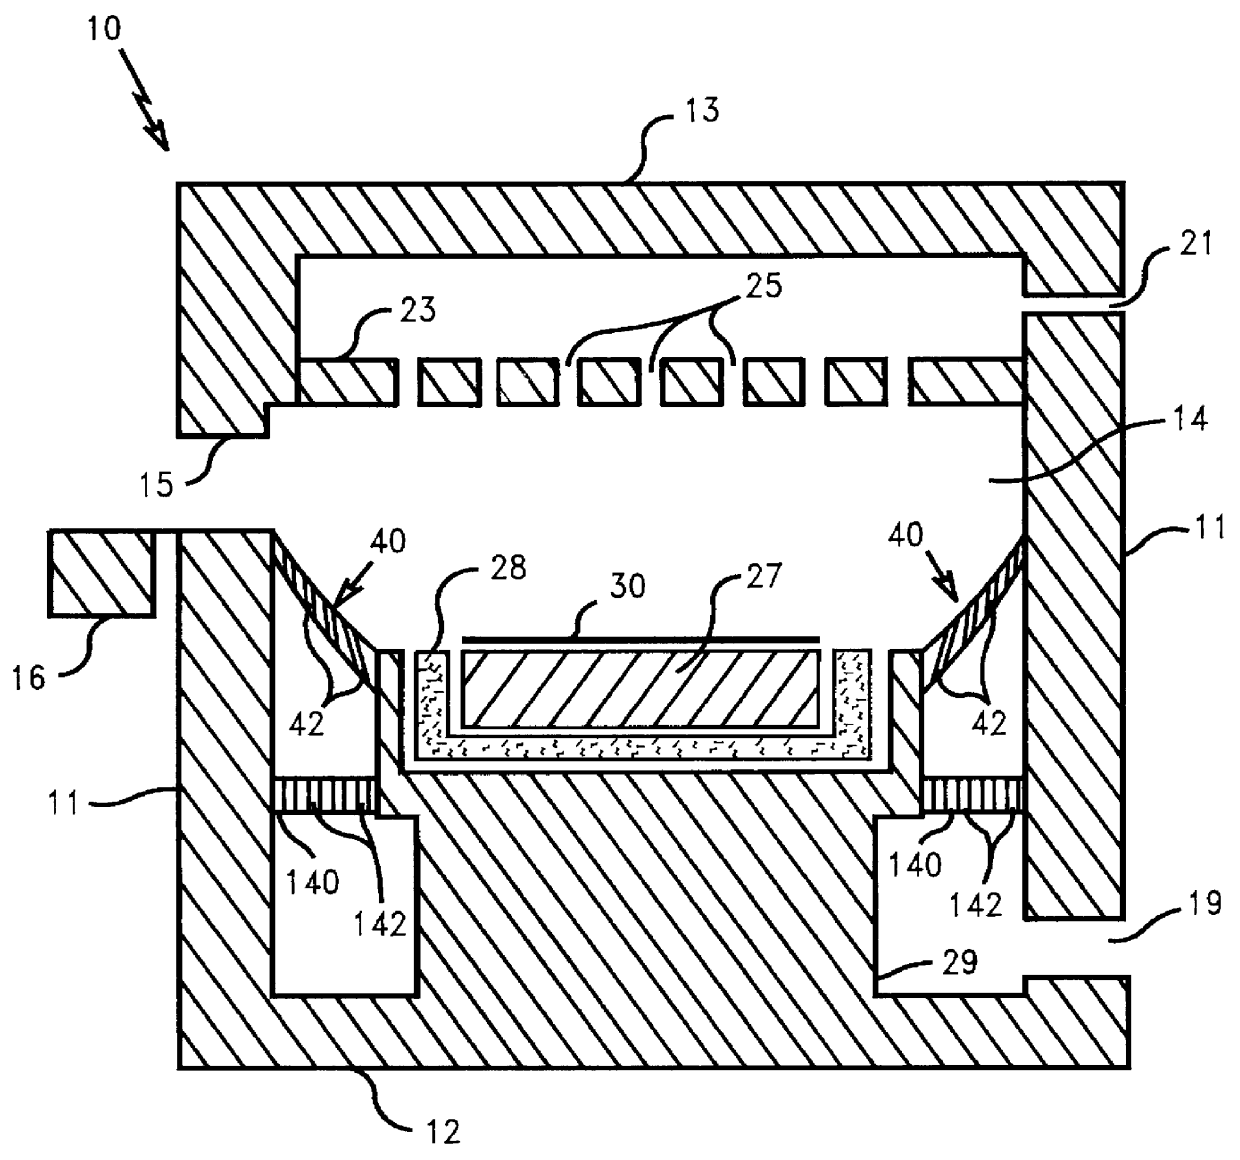 High conductance plasma containment structure